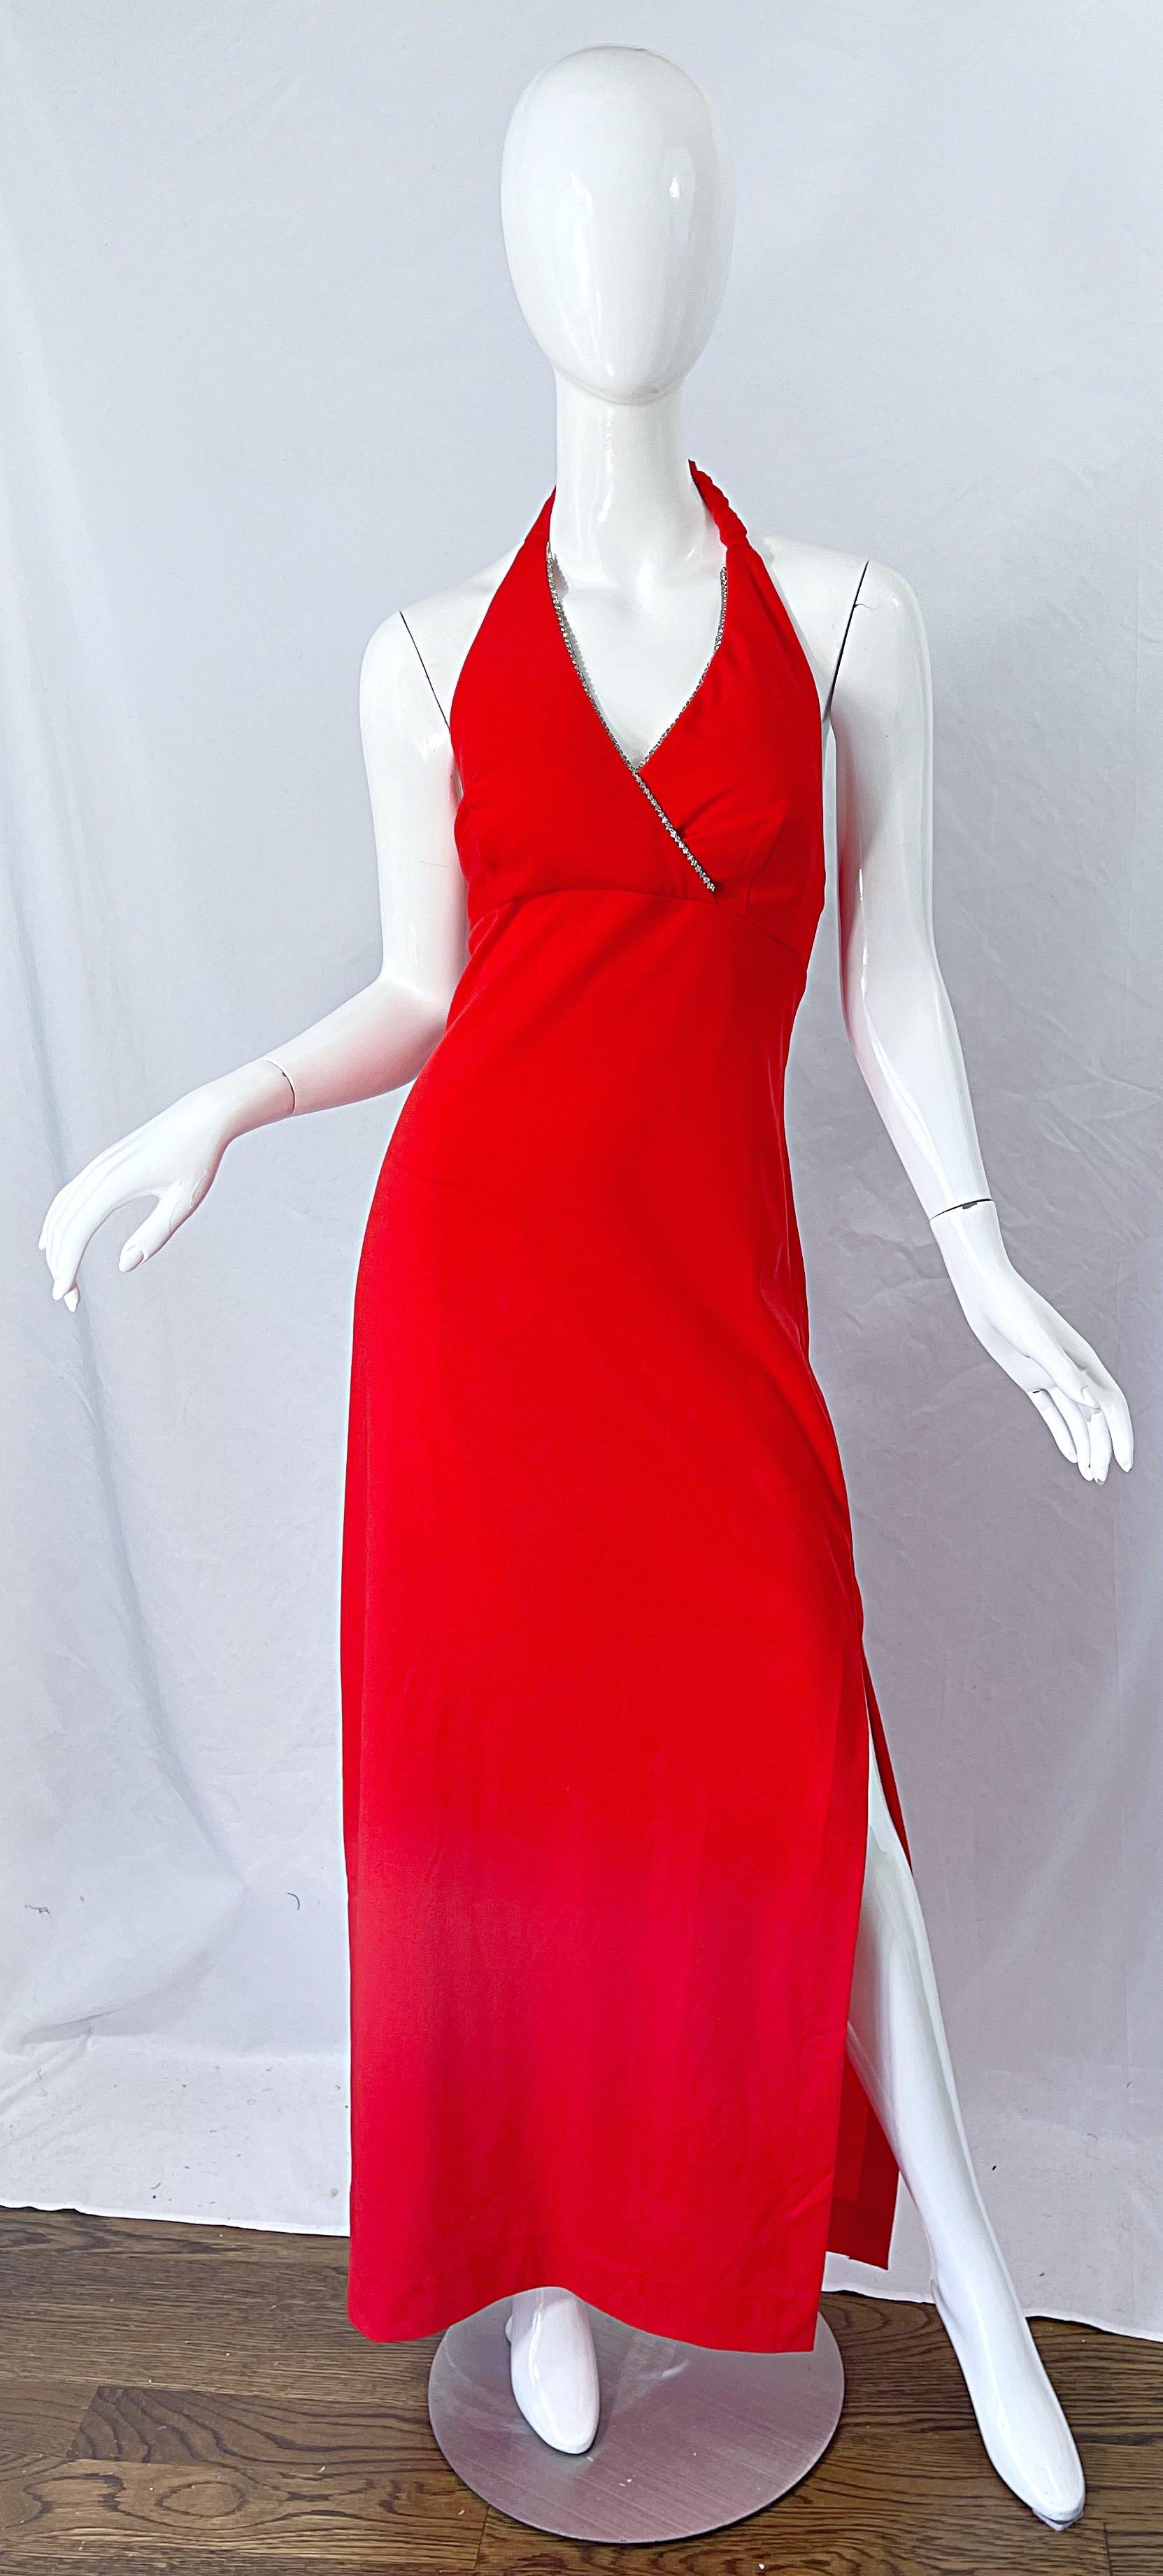 Sexy vintage 1970s JACK HARTLEY lipstick red rhinestone encrusted knit jersey halter maxi dress ! Features rhinestones on the front bust. Hidden zipper up the back with hook-and-eye closure. Slit up the left leg reveals just the right amount of